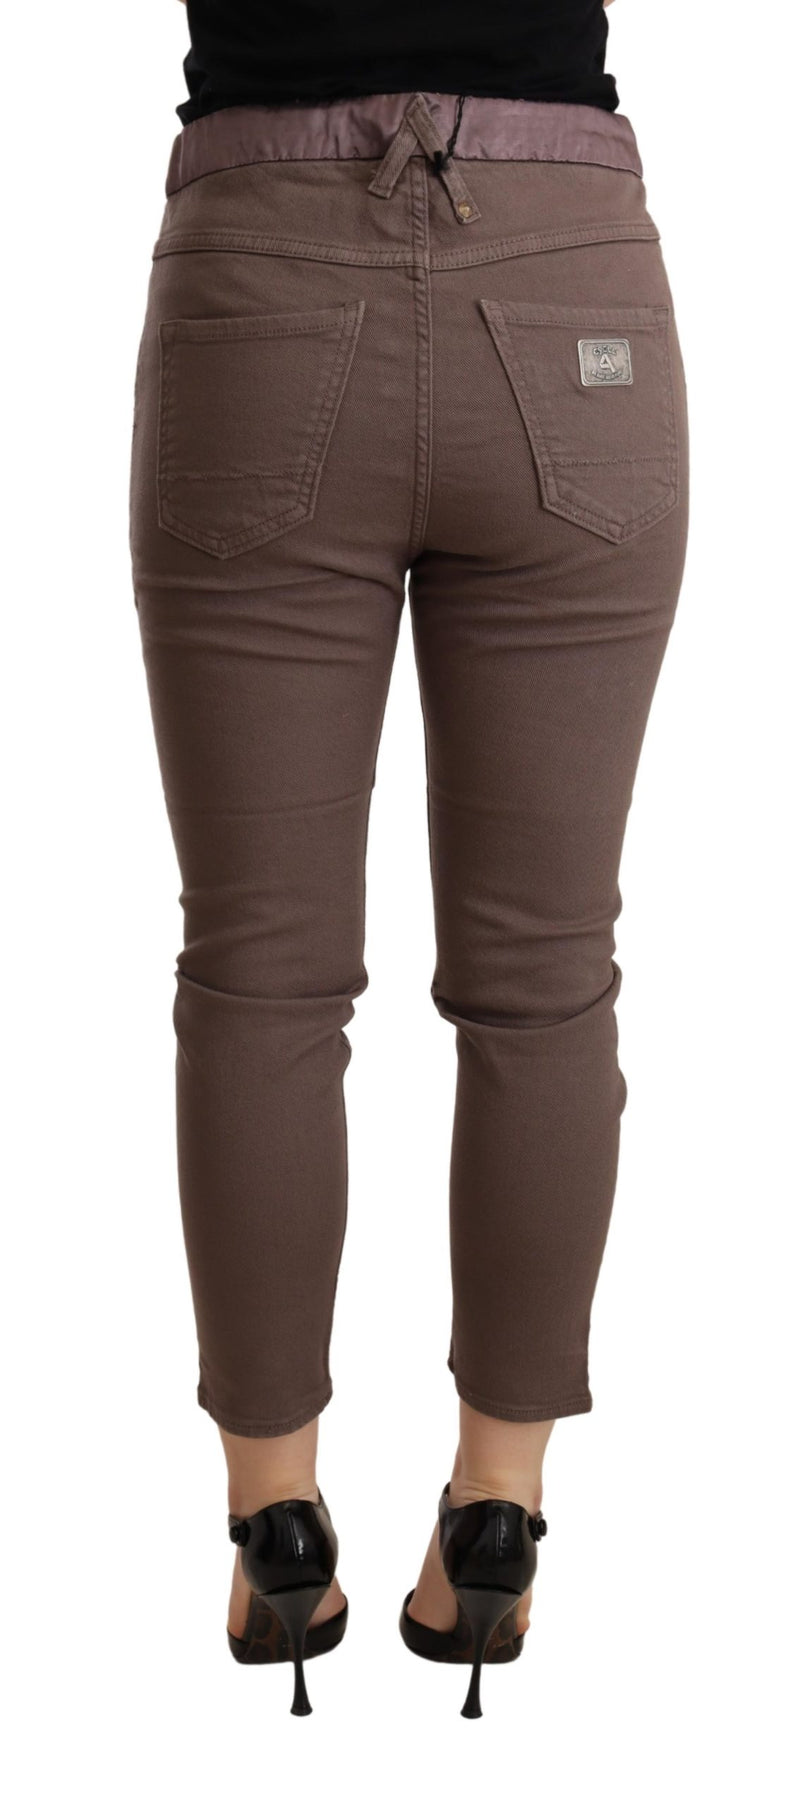 Brown Mid Waist Cropped Skinny Stretch Trouser